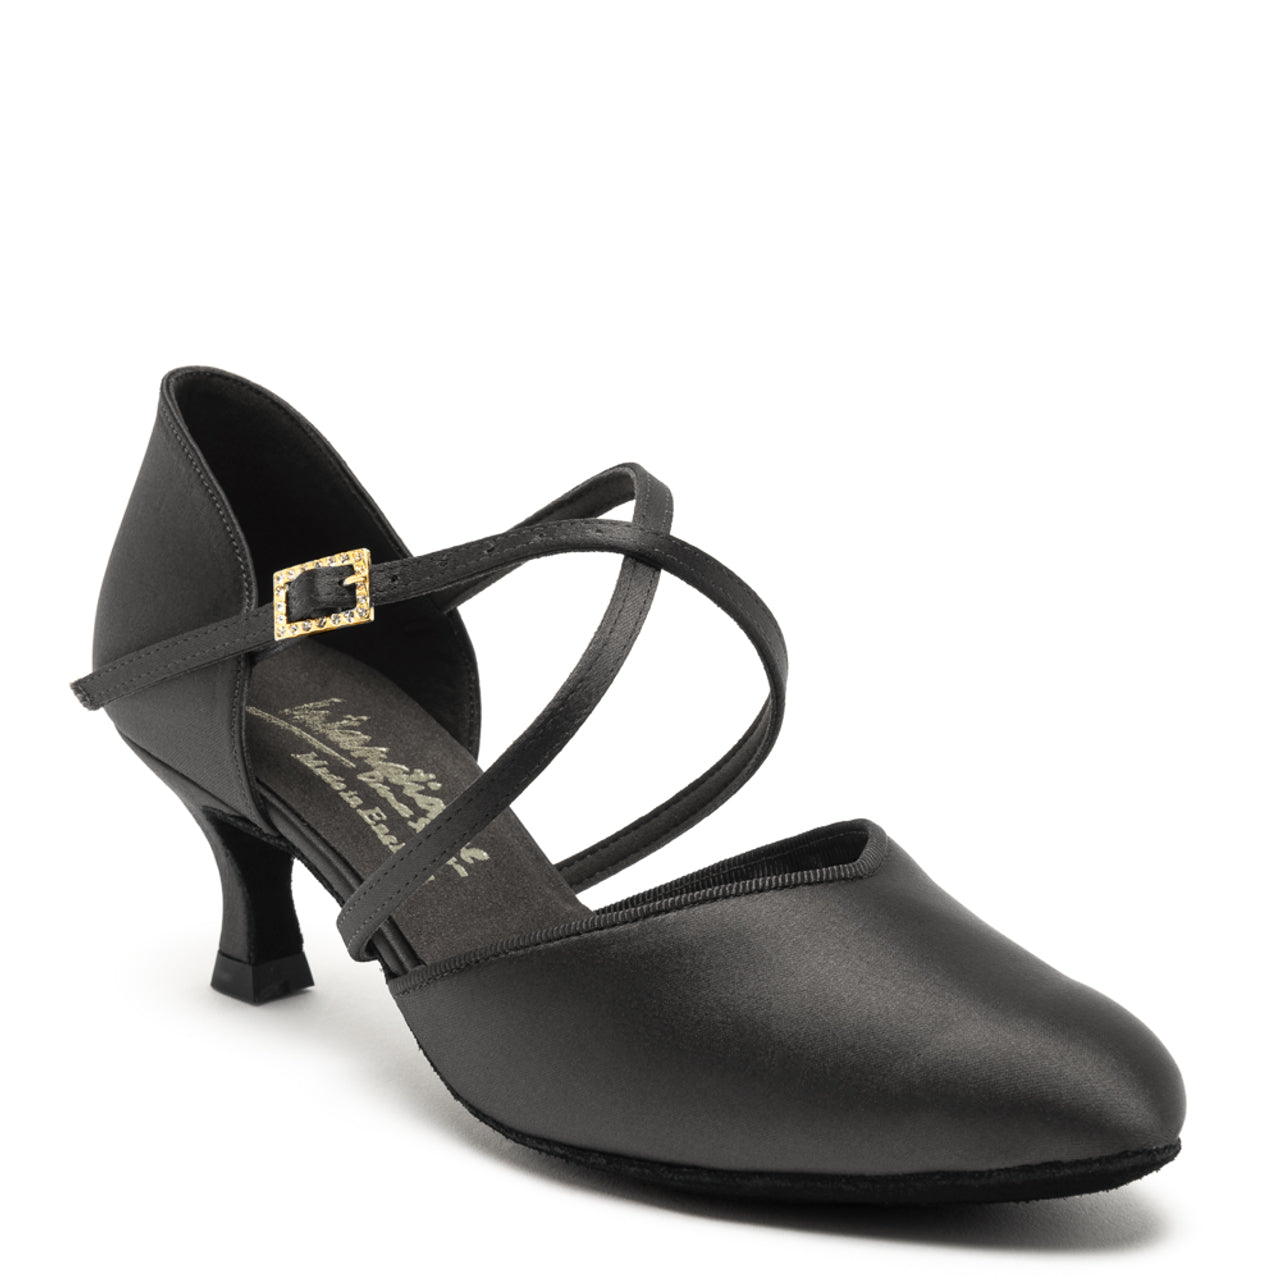 American Style International Dance Shoes IDS Ladies Ballroom Shoe Available in Multiple Colors and Heel Types AMERICAN SMOOTH